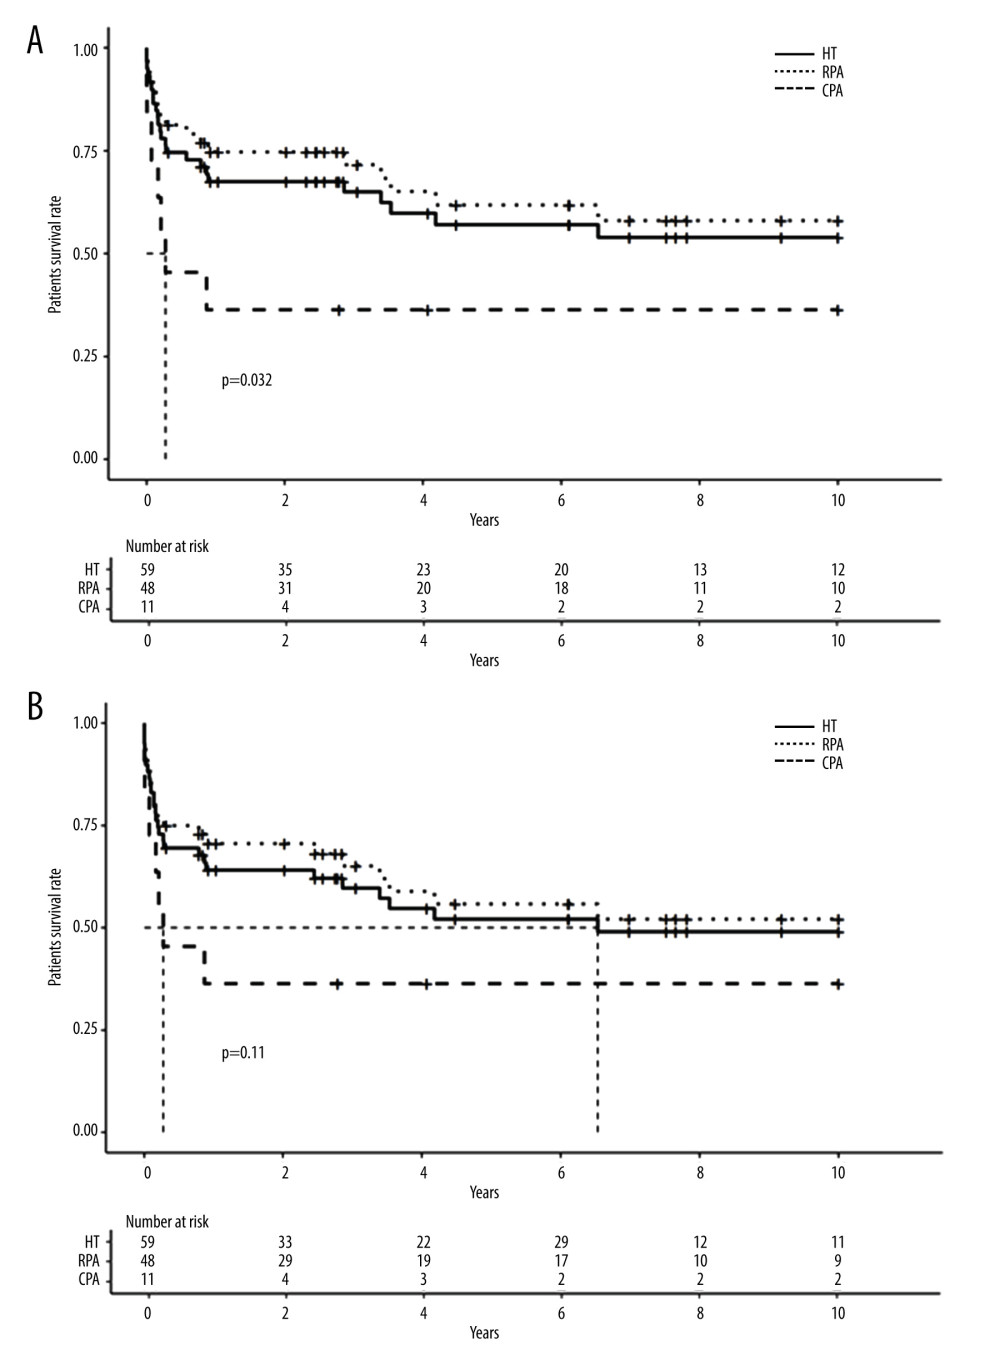 Long-term survival of patients and grafts after hemitransposition (HT) using cavoportal anastomosis (CPA) or renoportal anastomosis (RPA). (A). Long-term patient survival; (B) Long-term graft survival.